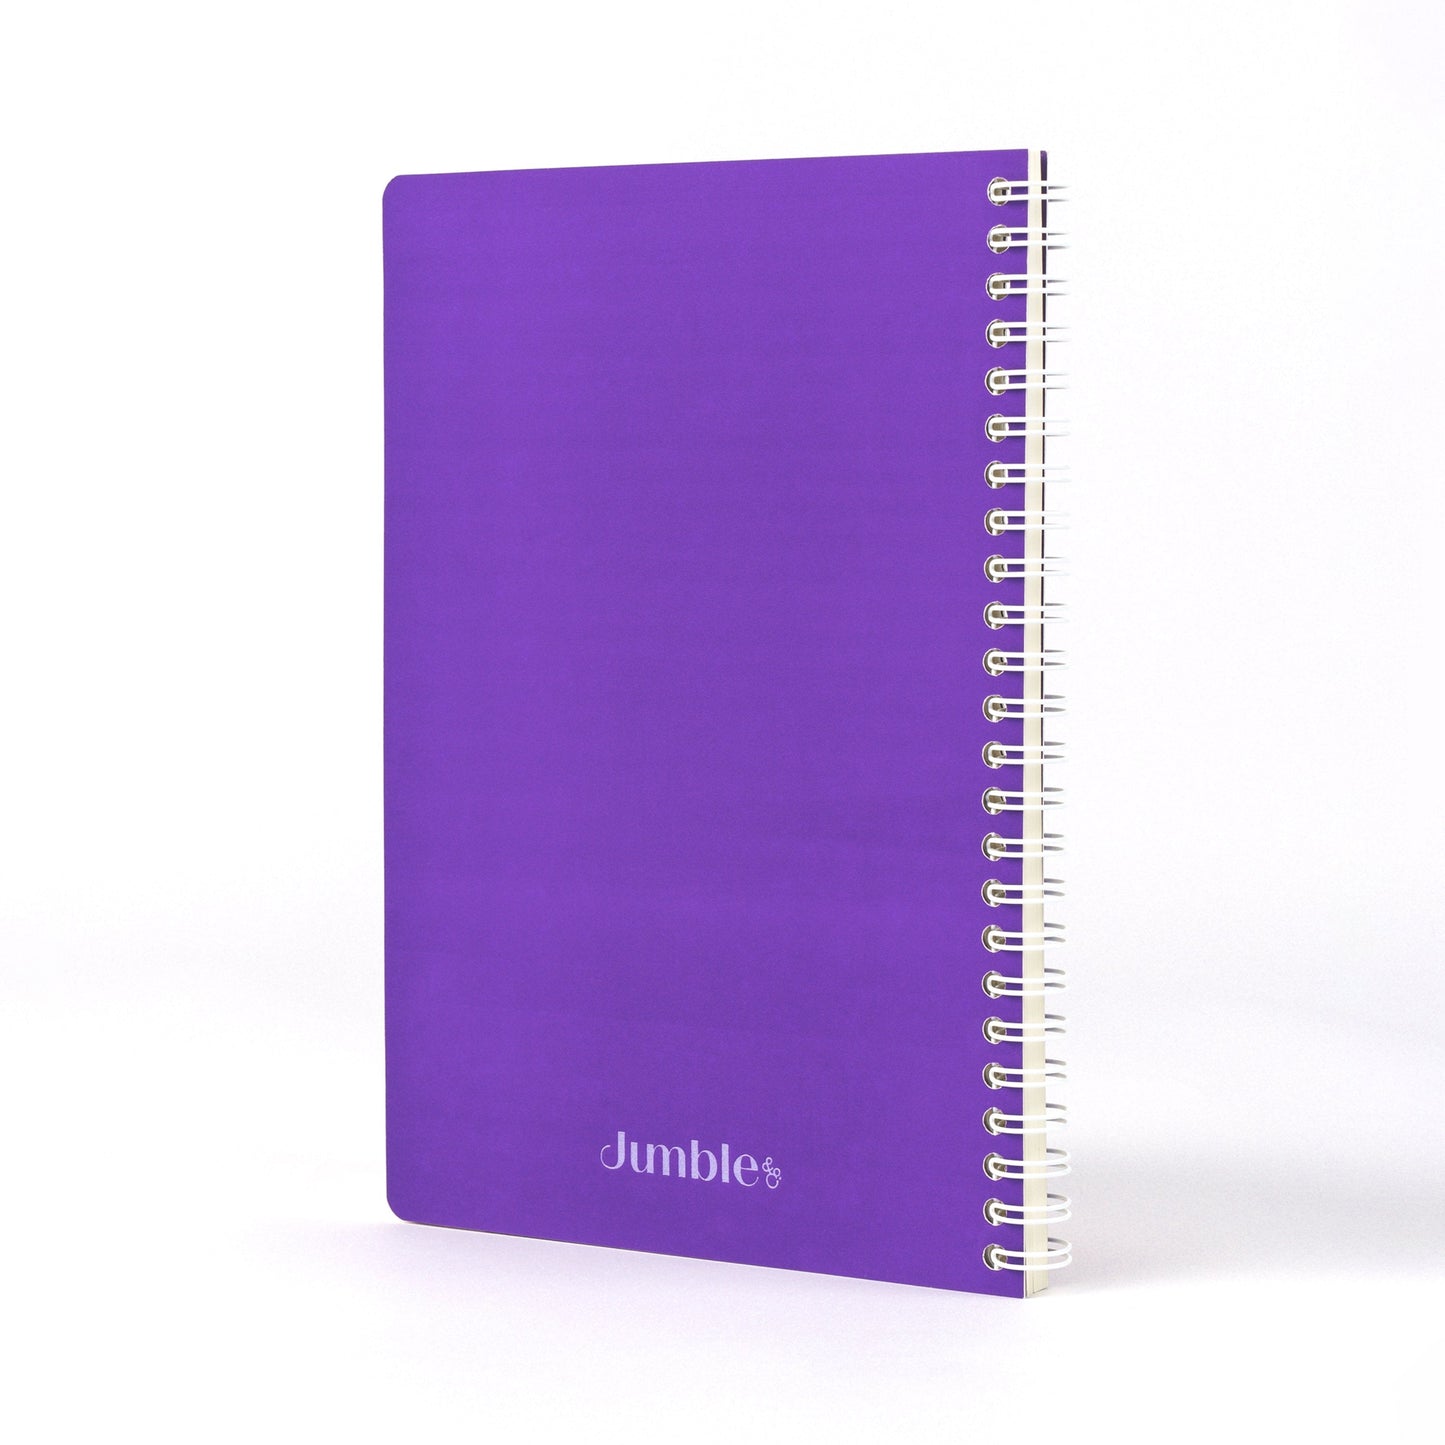 Convo Wiro Bound Ruled Notebook - Royal Mess Purple